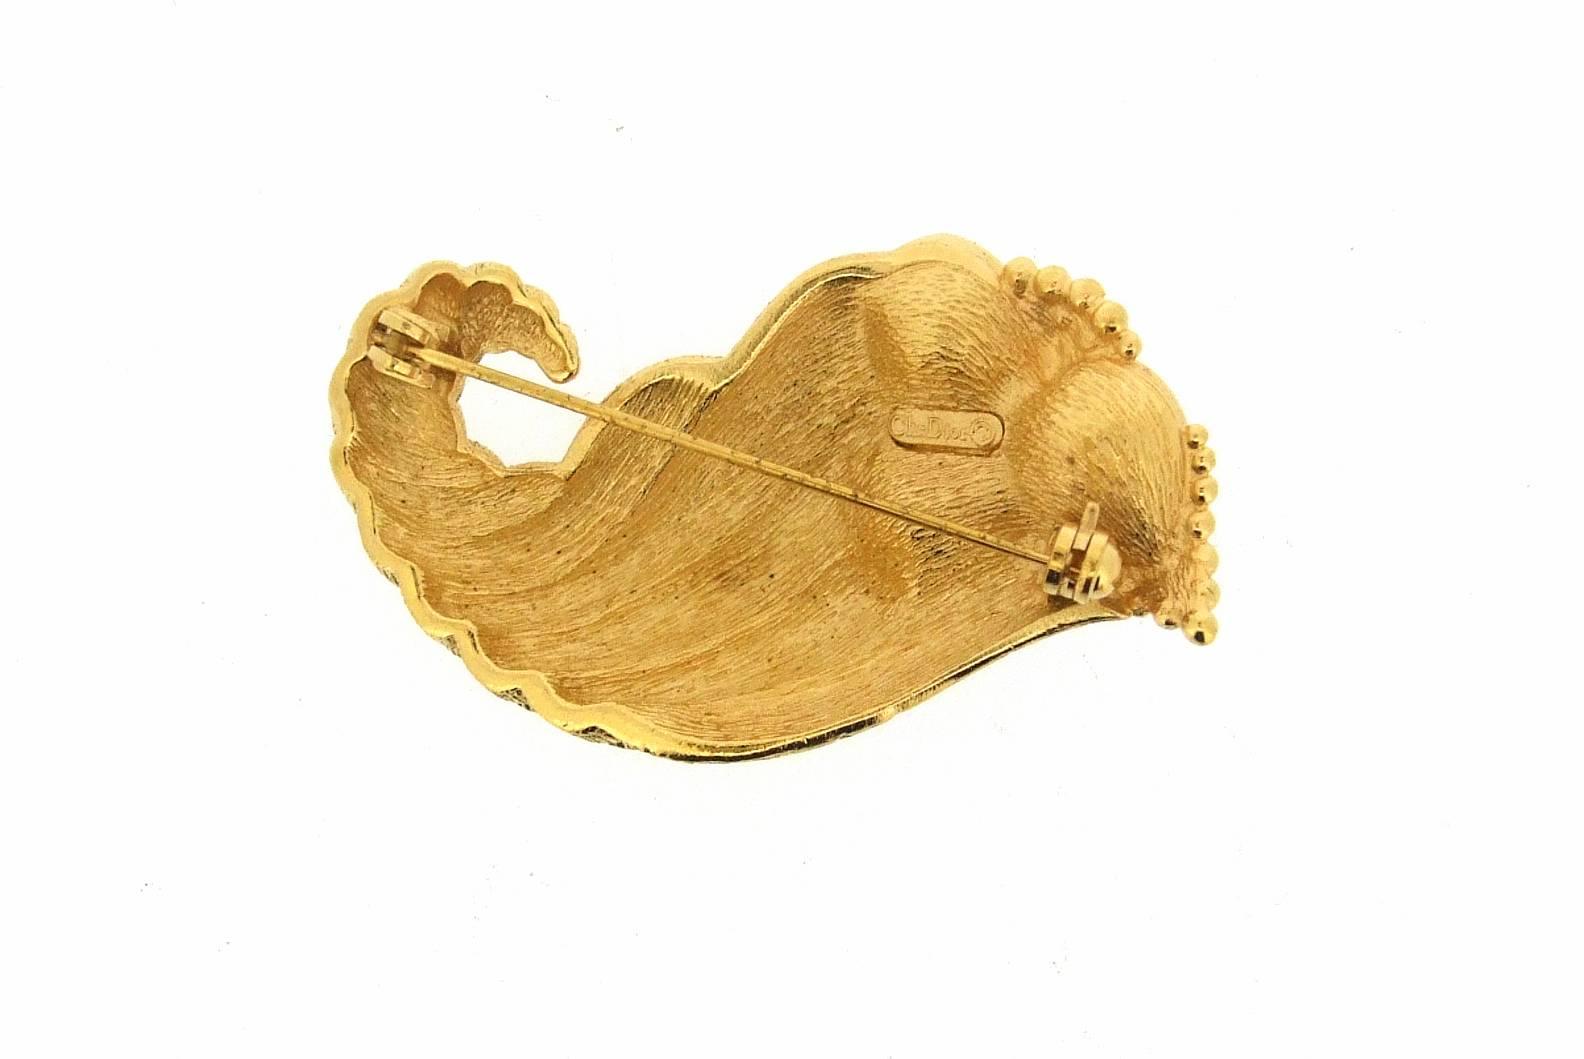 A vintage Christian Dior brooch featuring red crystal hearts in a gold shell. 
In gold plated costume metal.

It measures 4.8cm high by 3cm at the widest point.